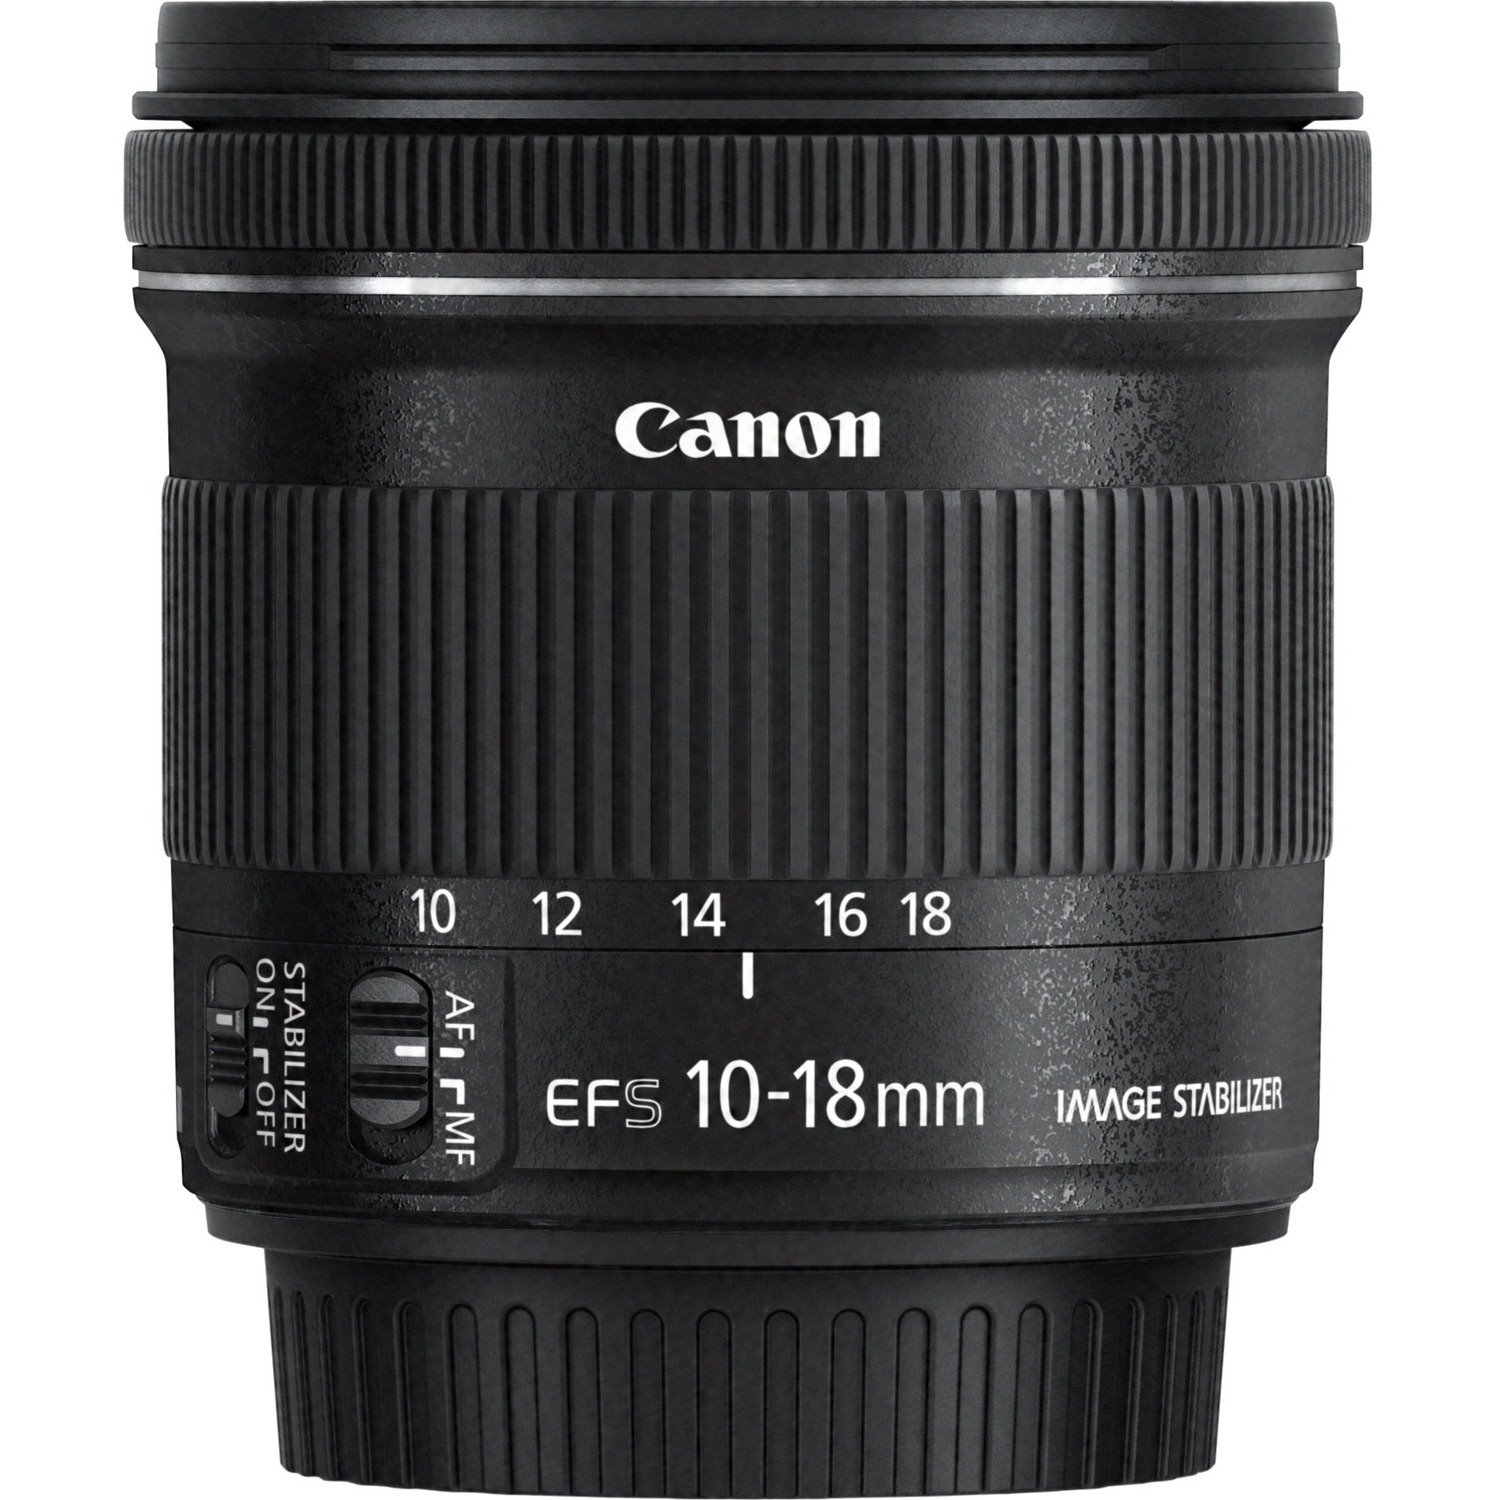 Canon - 10 mm to 18 mm - f/5.6 - Wide Angle Zoom Lens for Canon EF-S